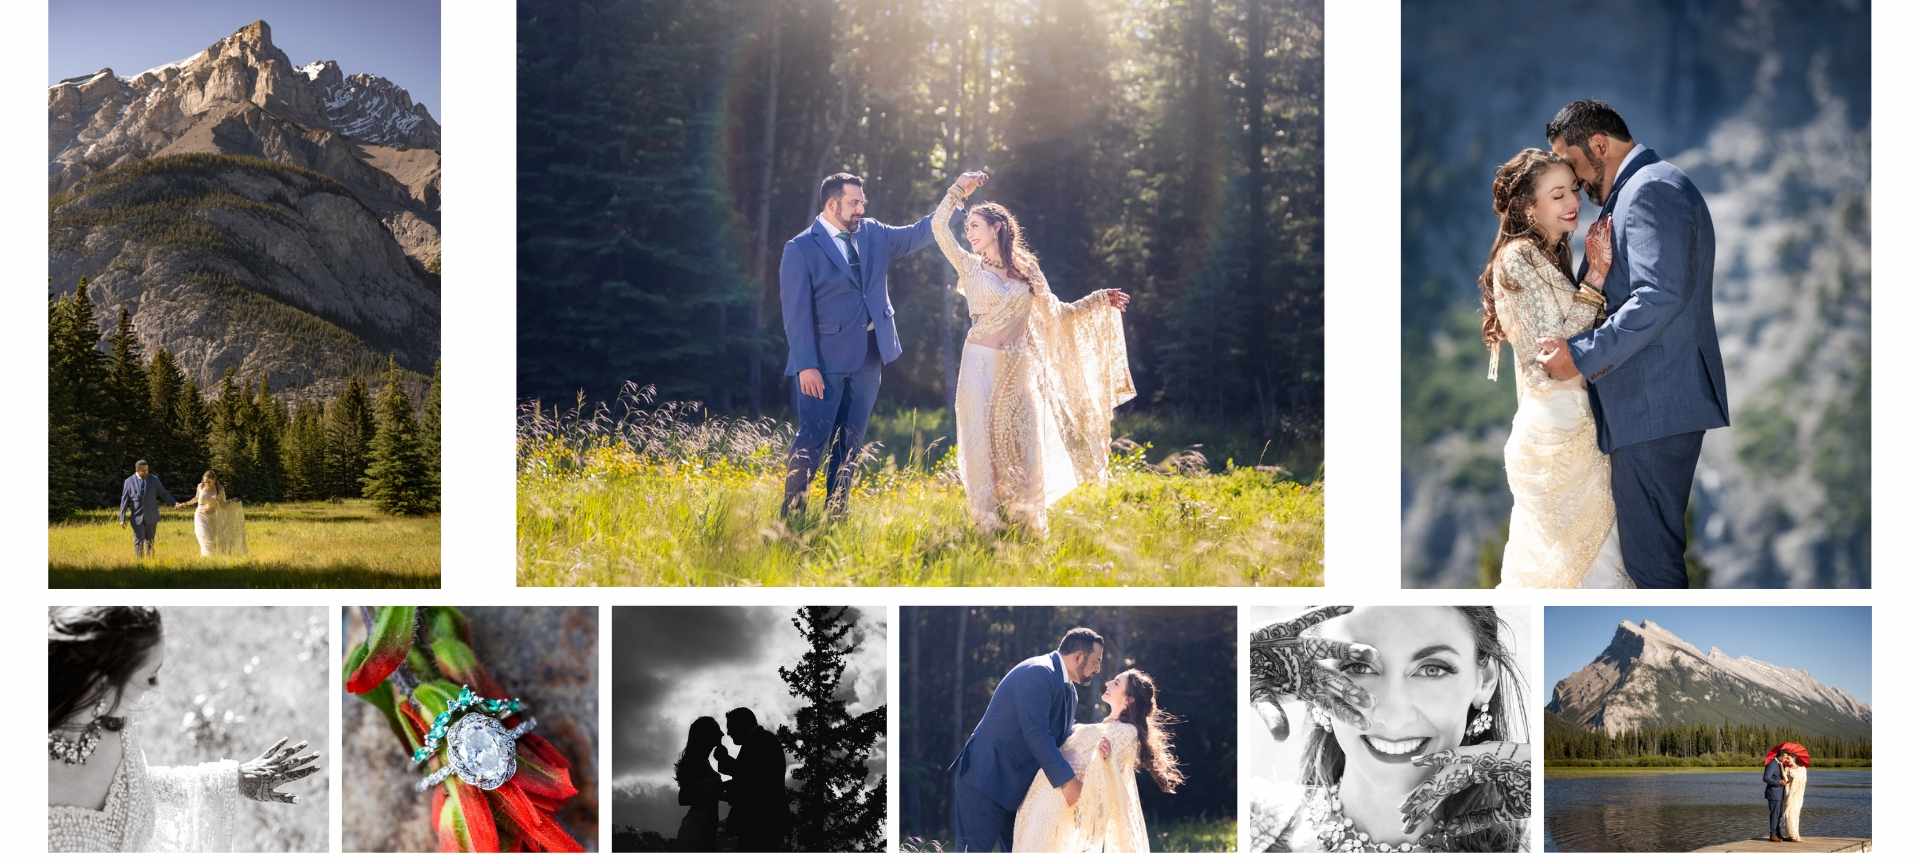 banff elopement package in canada - rocky mountains wedding